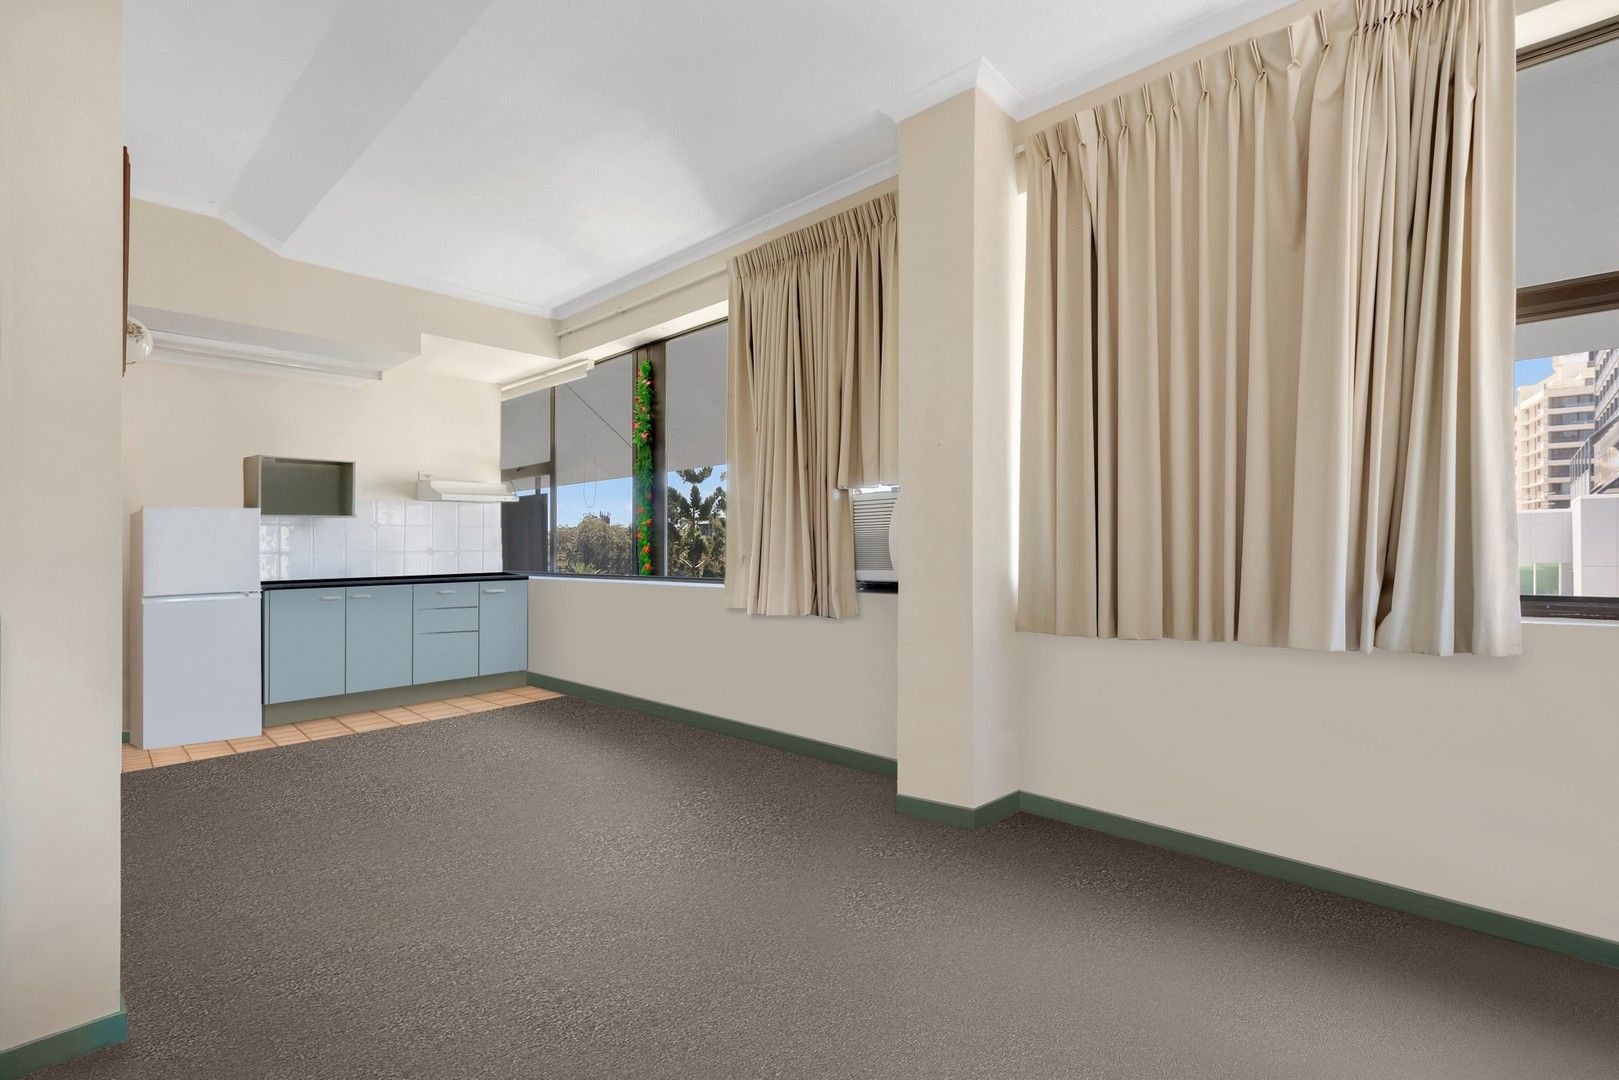 406-406A/391 Wickham Terrace, Spring Hill QLD 4000, Image 0